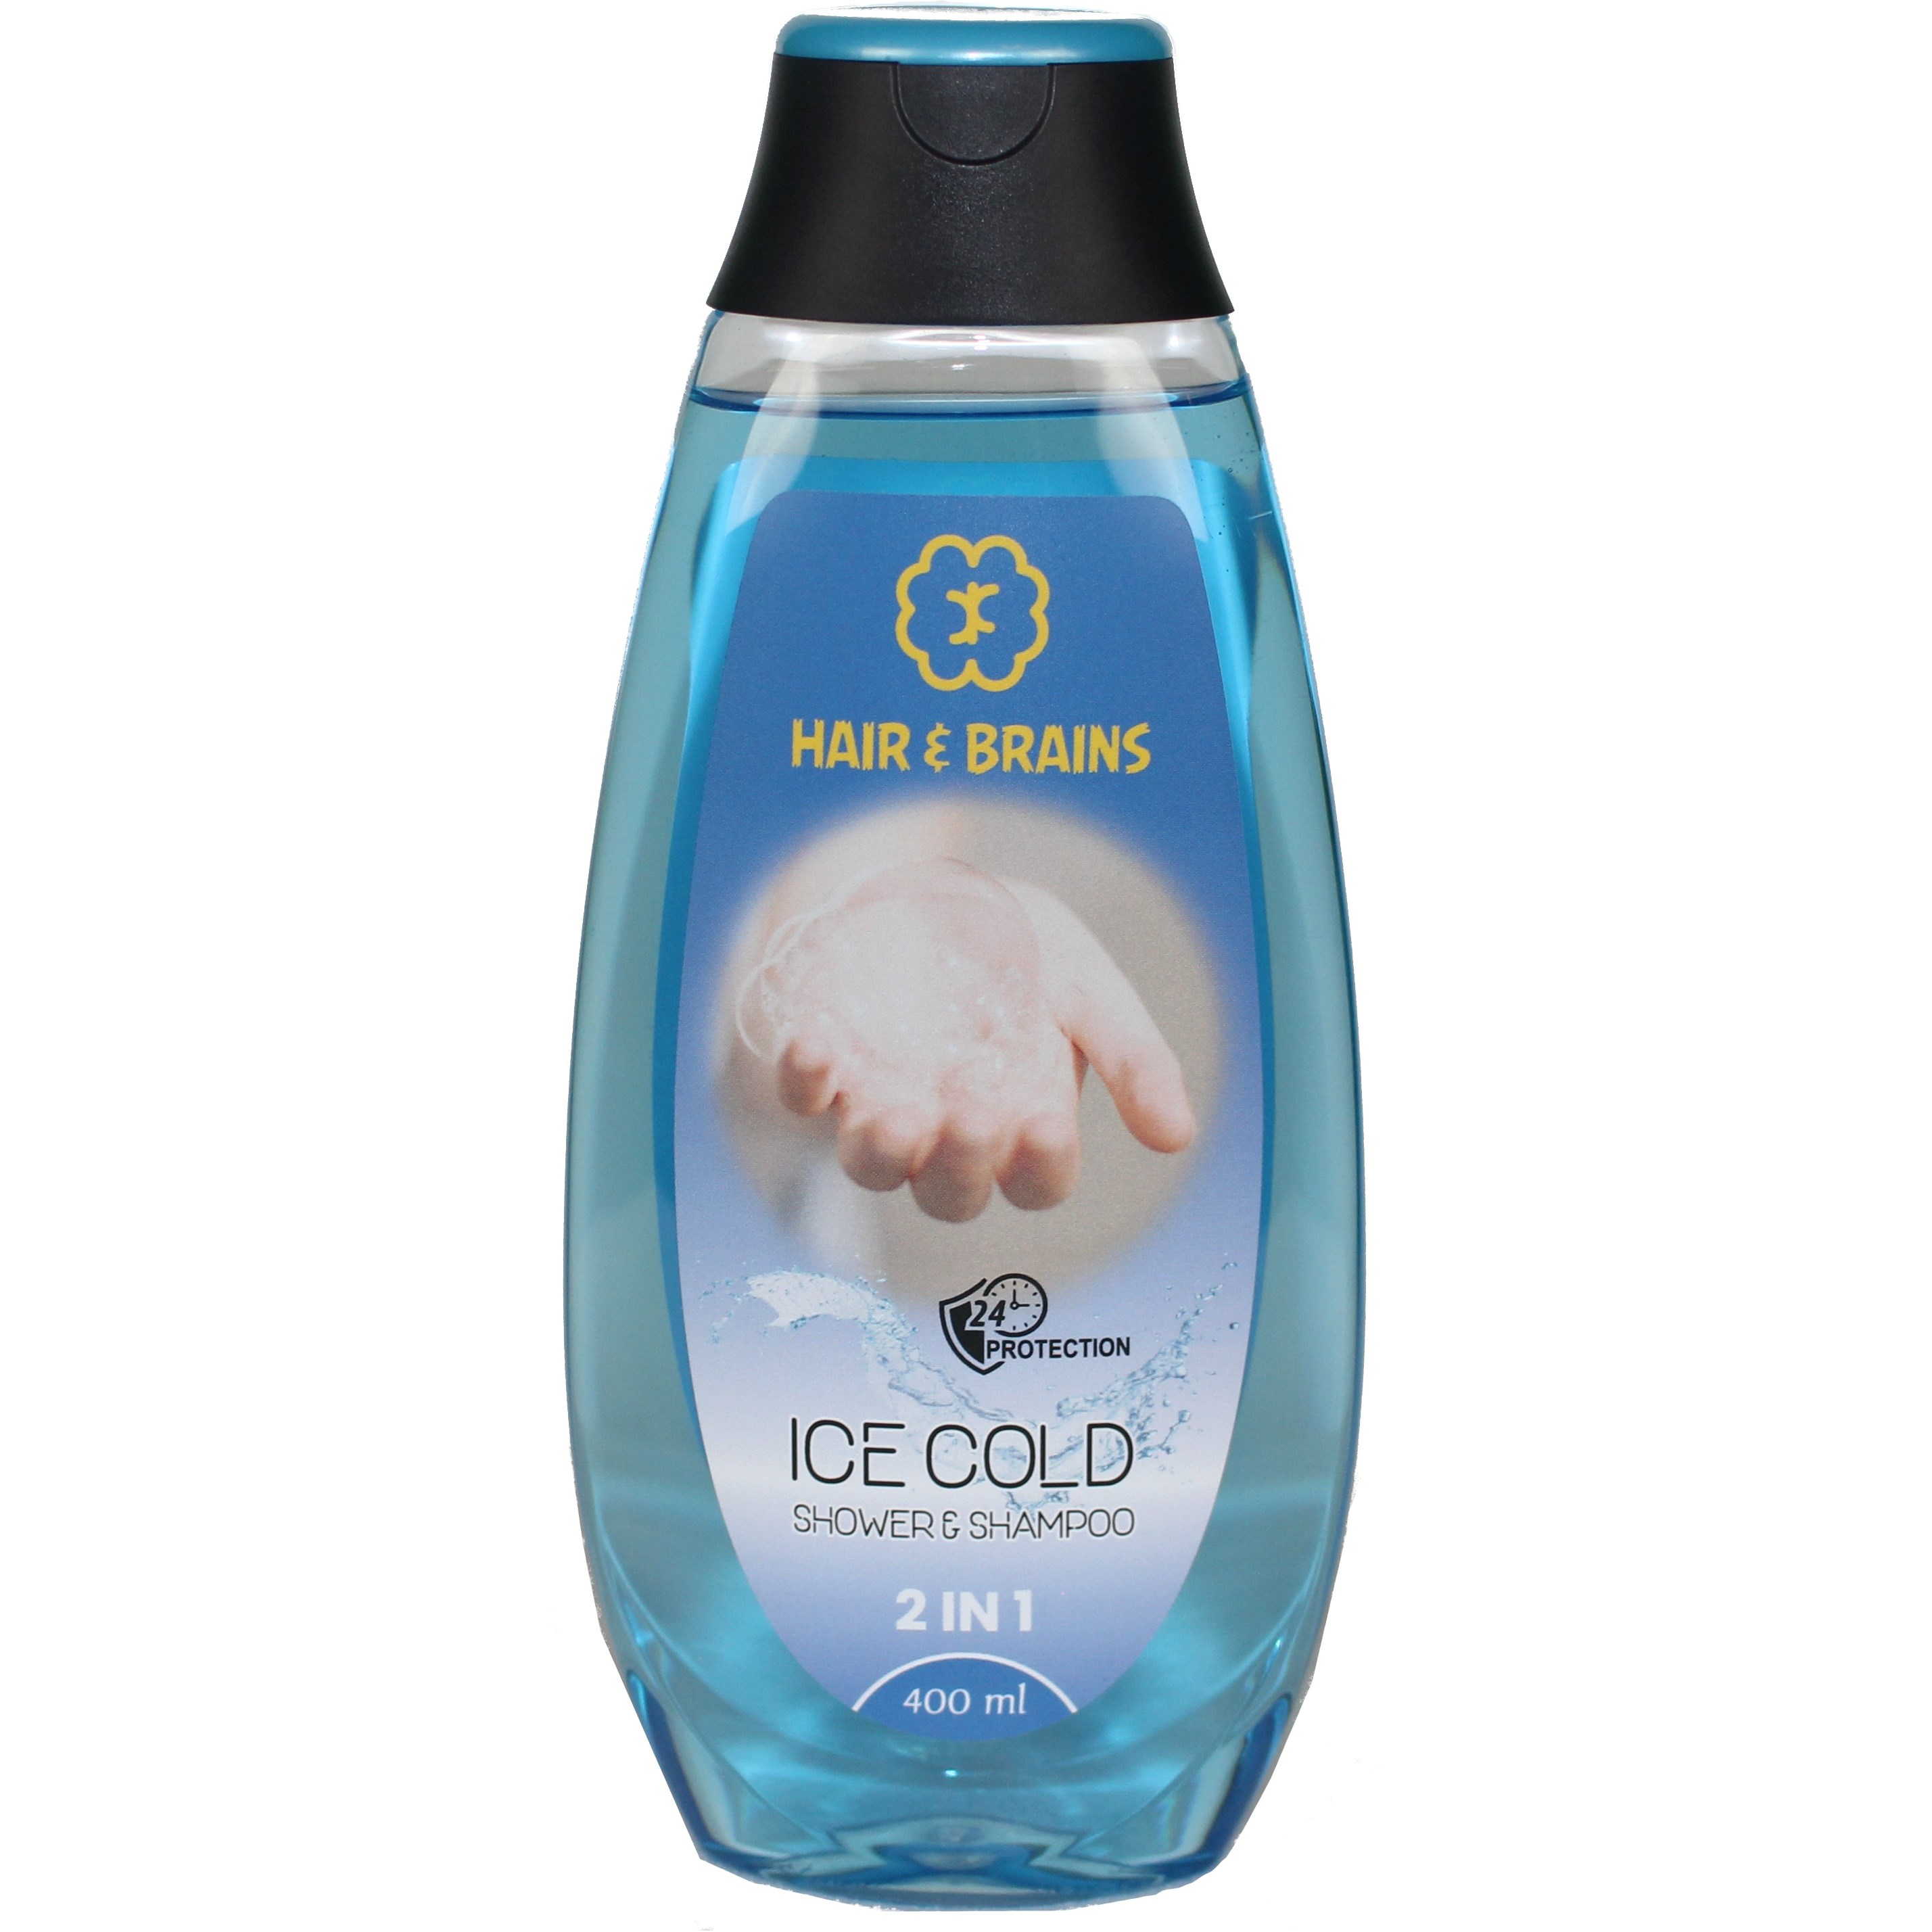 Hair & Brains Homeless Collection Ice Cold 2in1 Shower & Shampoo